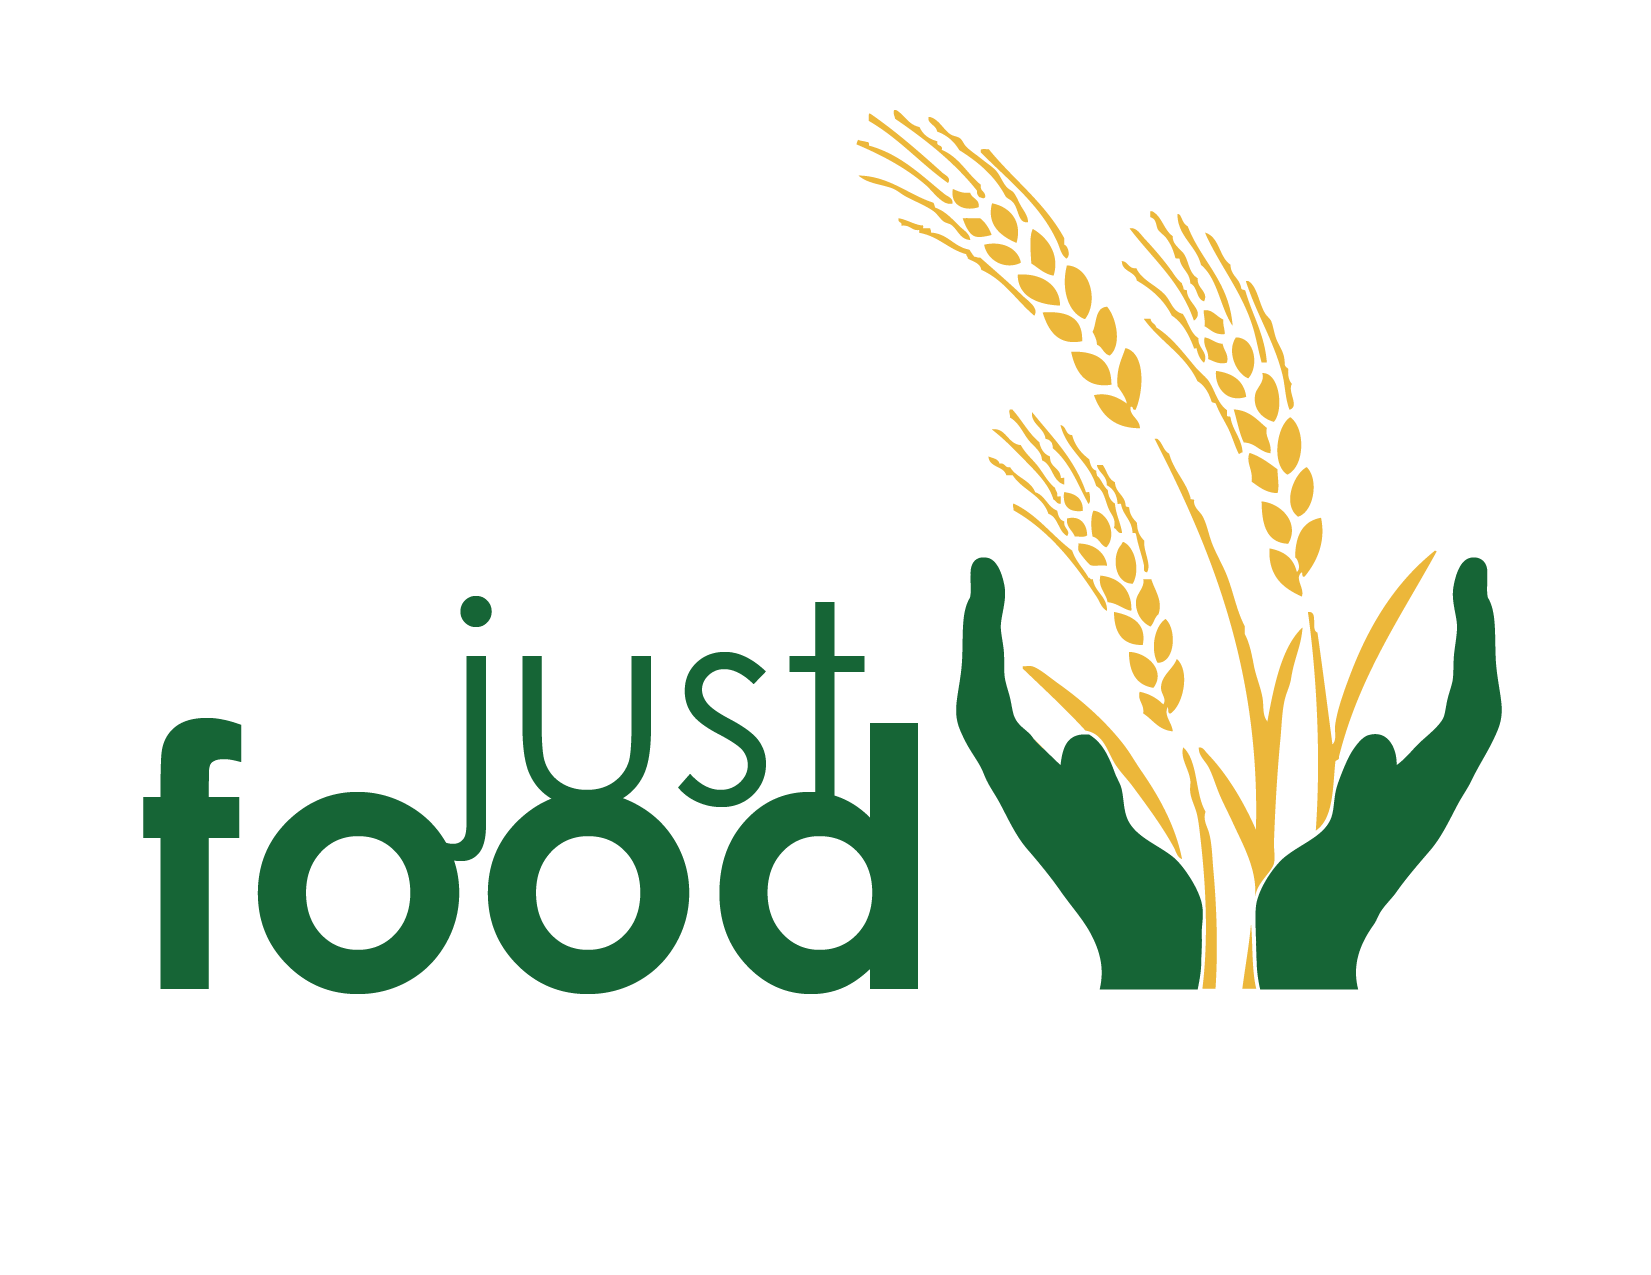 Just Food logo hands and wheat